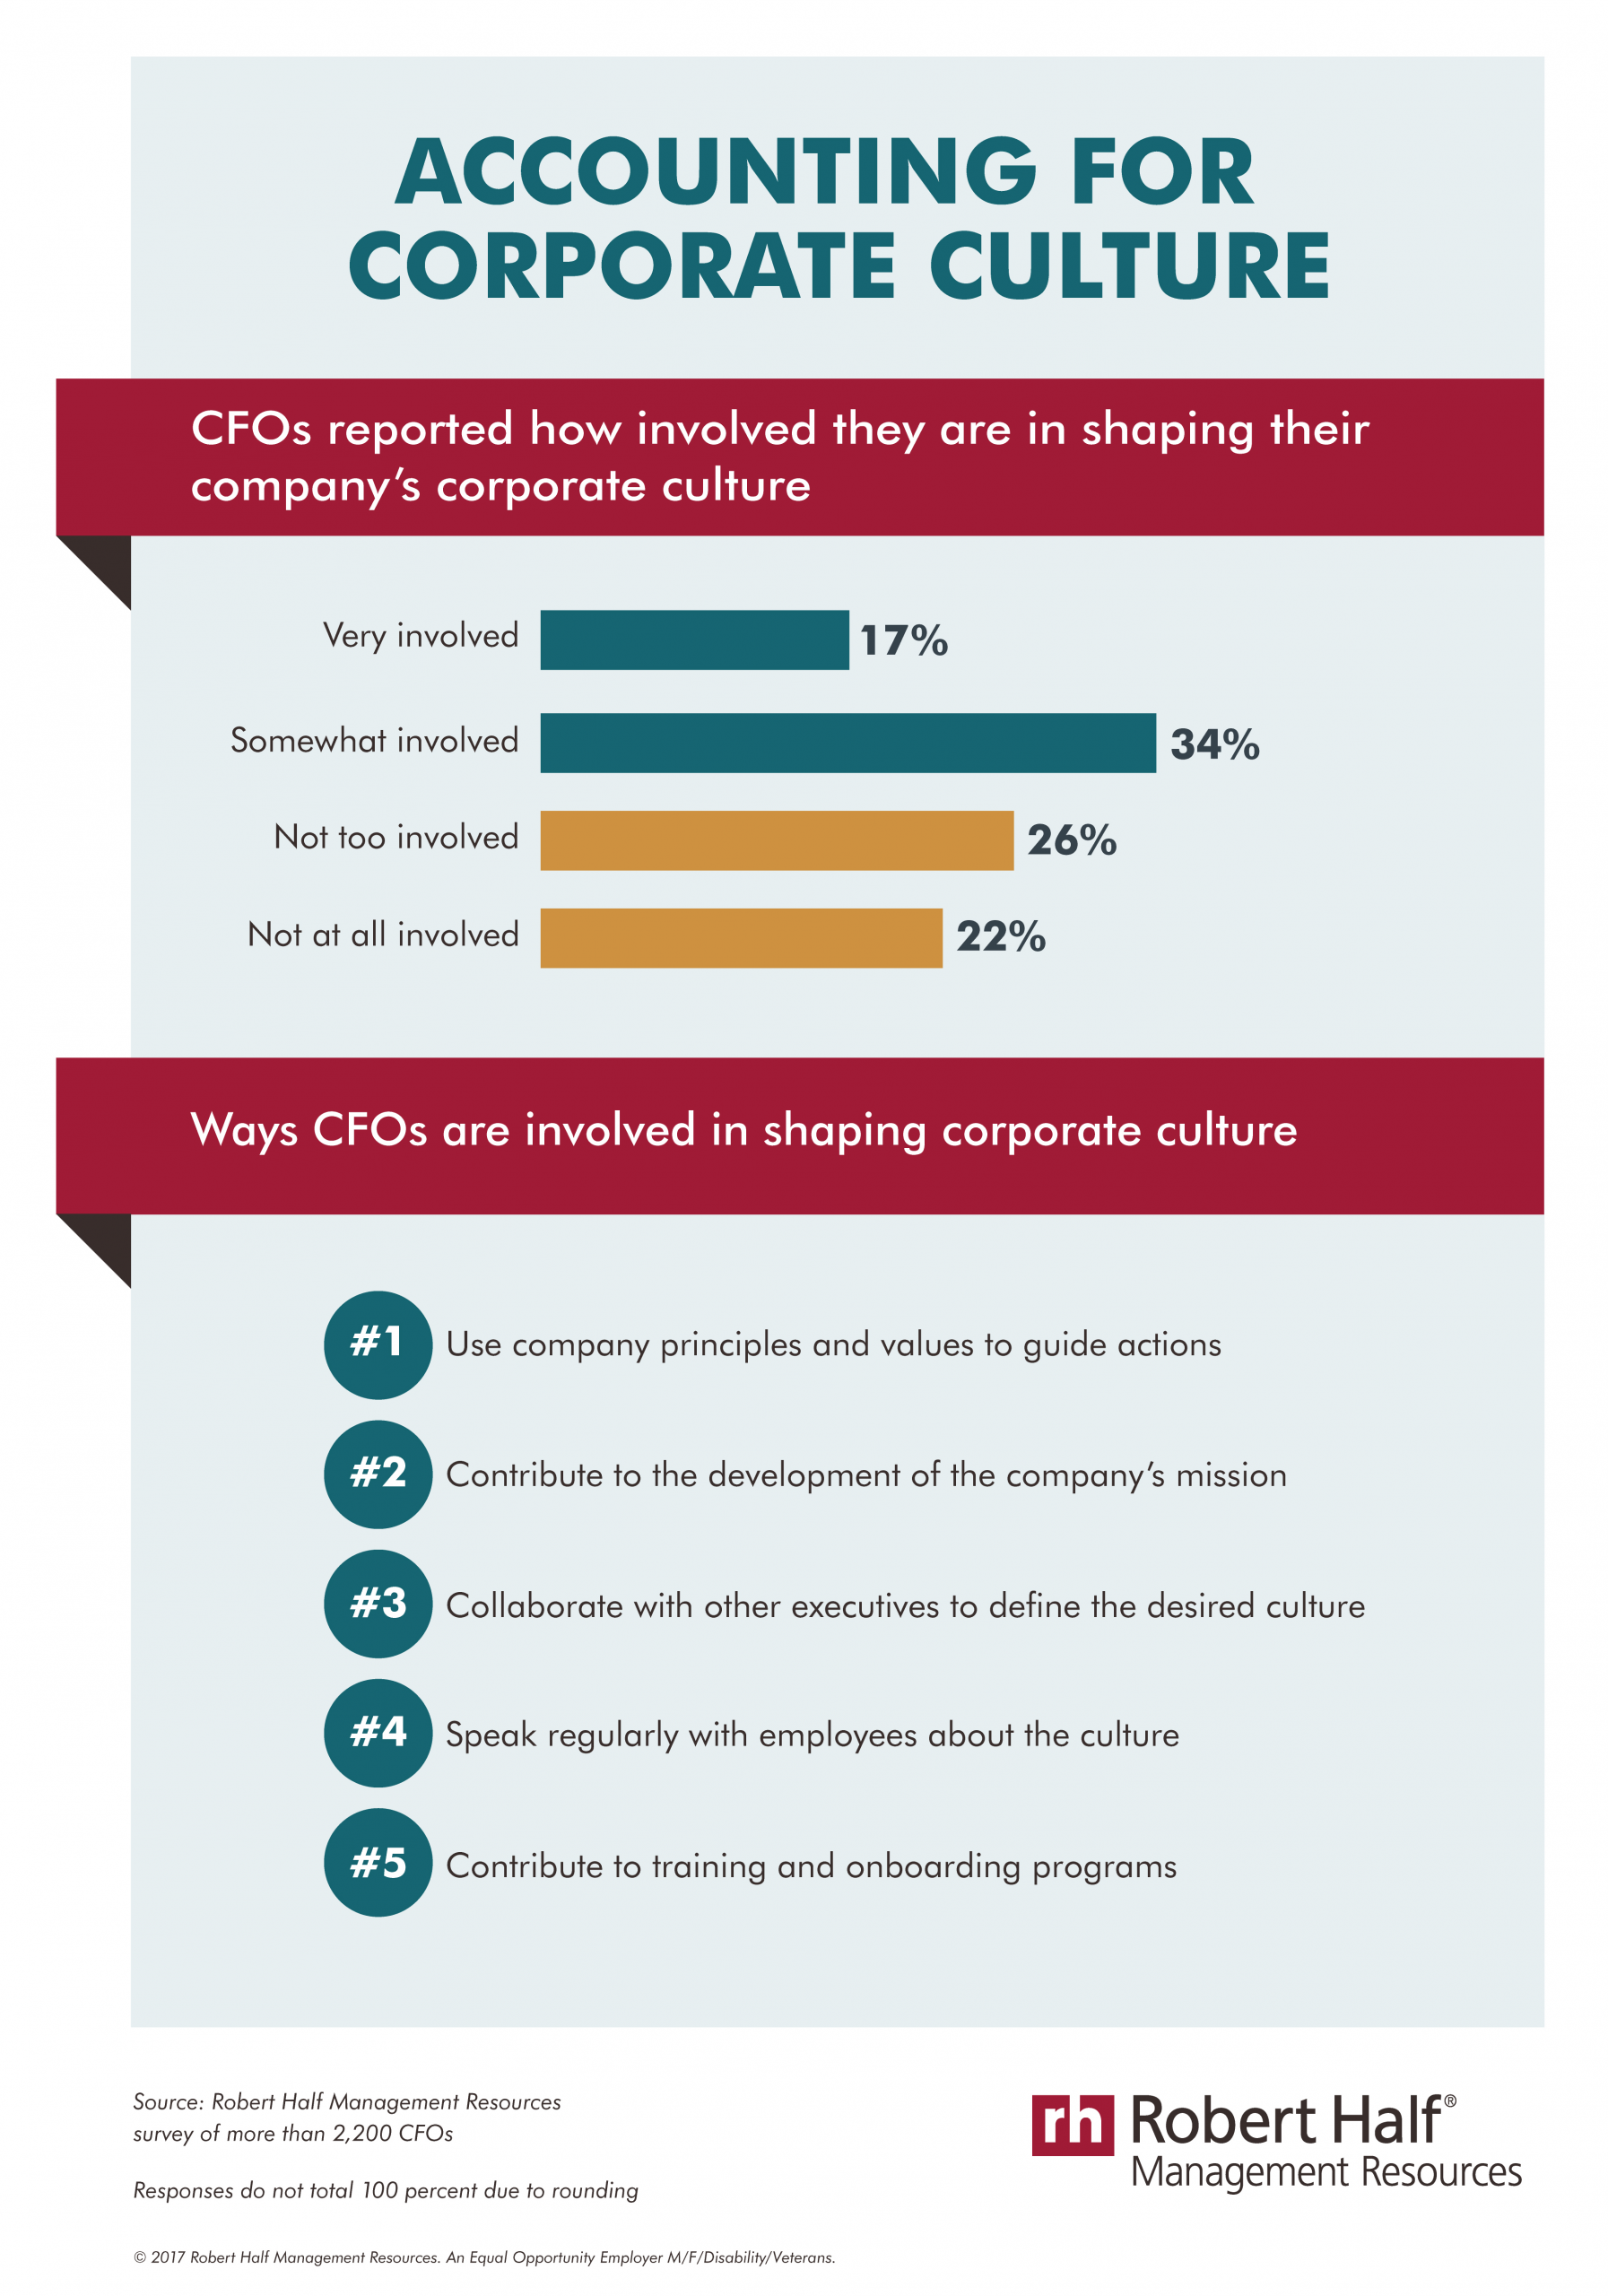 cfos corporate culture infographic robert half management resources 1  5995e78ddbe24